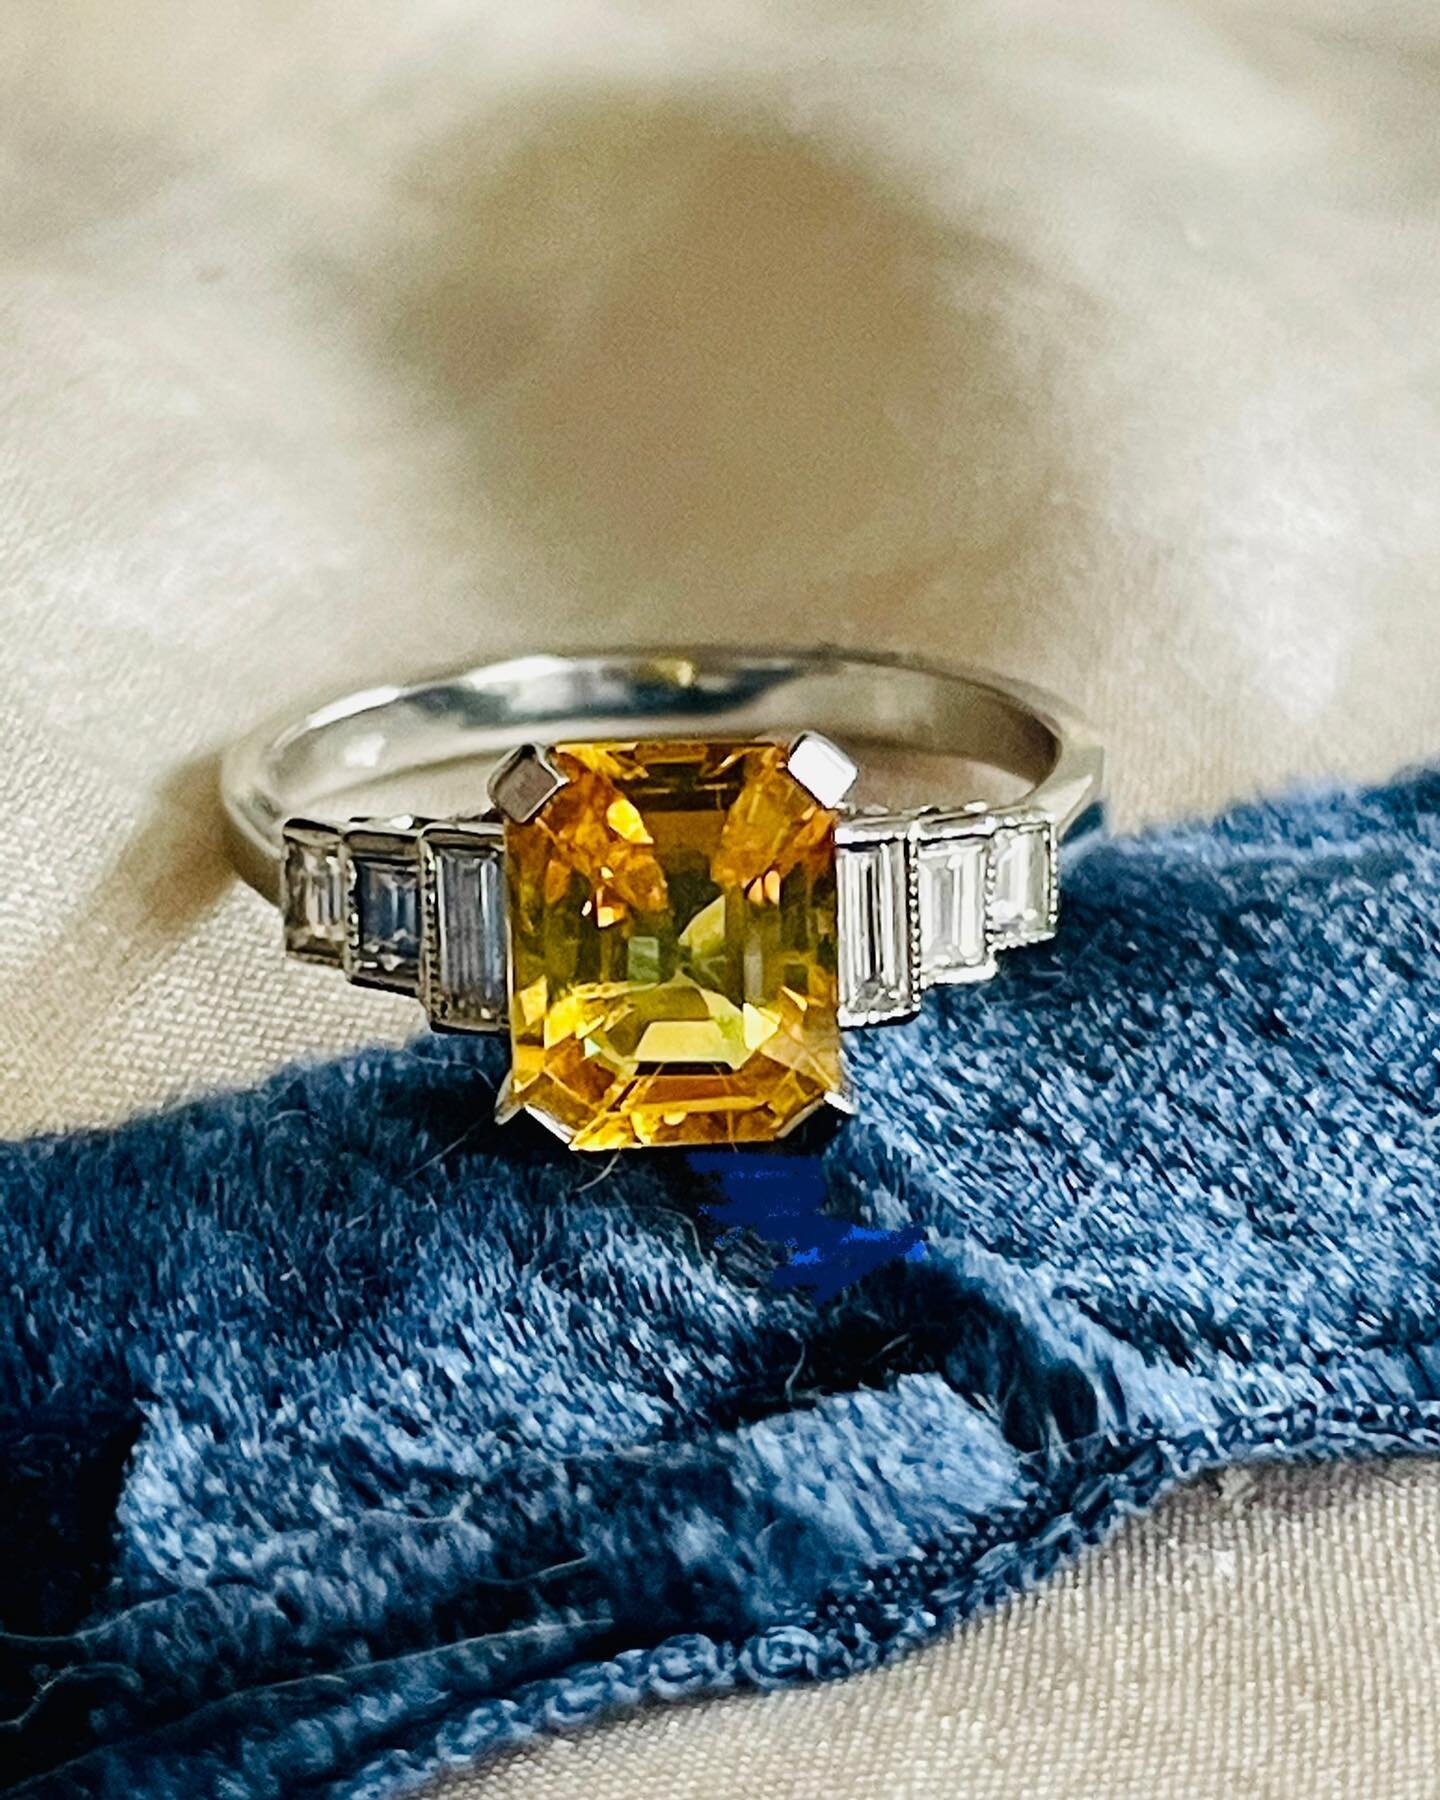 A striking , yellow sapphire and baguette diamond ring which makes a great Engagement ring . Set in platinum. In stock now . Come and see it .

#instajewellery #instajewerly #artdecoring #jewelleryaddict #jeweloftheday #engagementring #wedding #grays